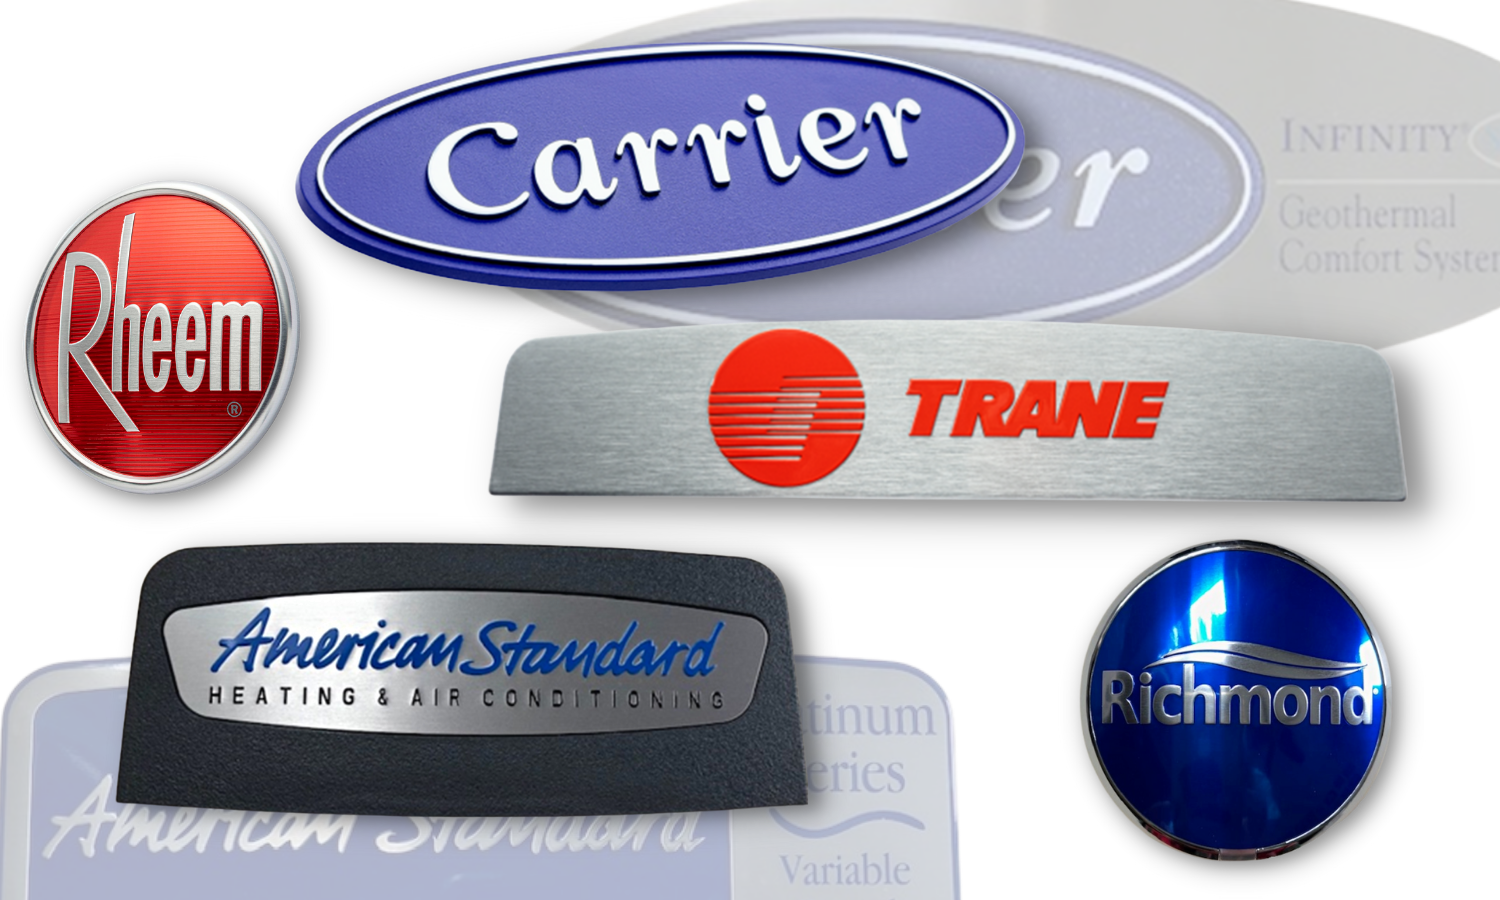 collage of HVAC brands. circle badge with chrome border and red interior, with raised chrome letters that say Rheem. Blue oval badge with inset white border and raised white letters that say Carrier. Rectangular shaped badge with a horizontally brushed aluminum background with raised orange logo and letters that say TRANE. Circle badge with chrome border, metallic blue background, and raised chrome logo and letters that say Richmond. Fat rectangular shaped badge with plastic background and a raw aluminum oval shaped insert with blue copy that says American Standard.